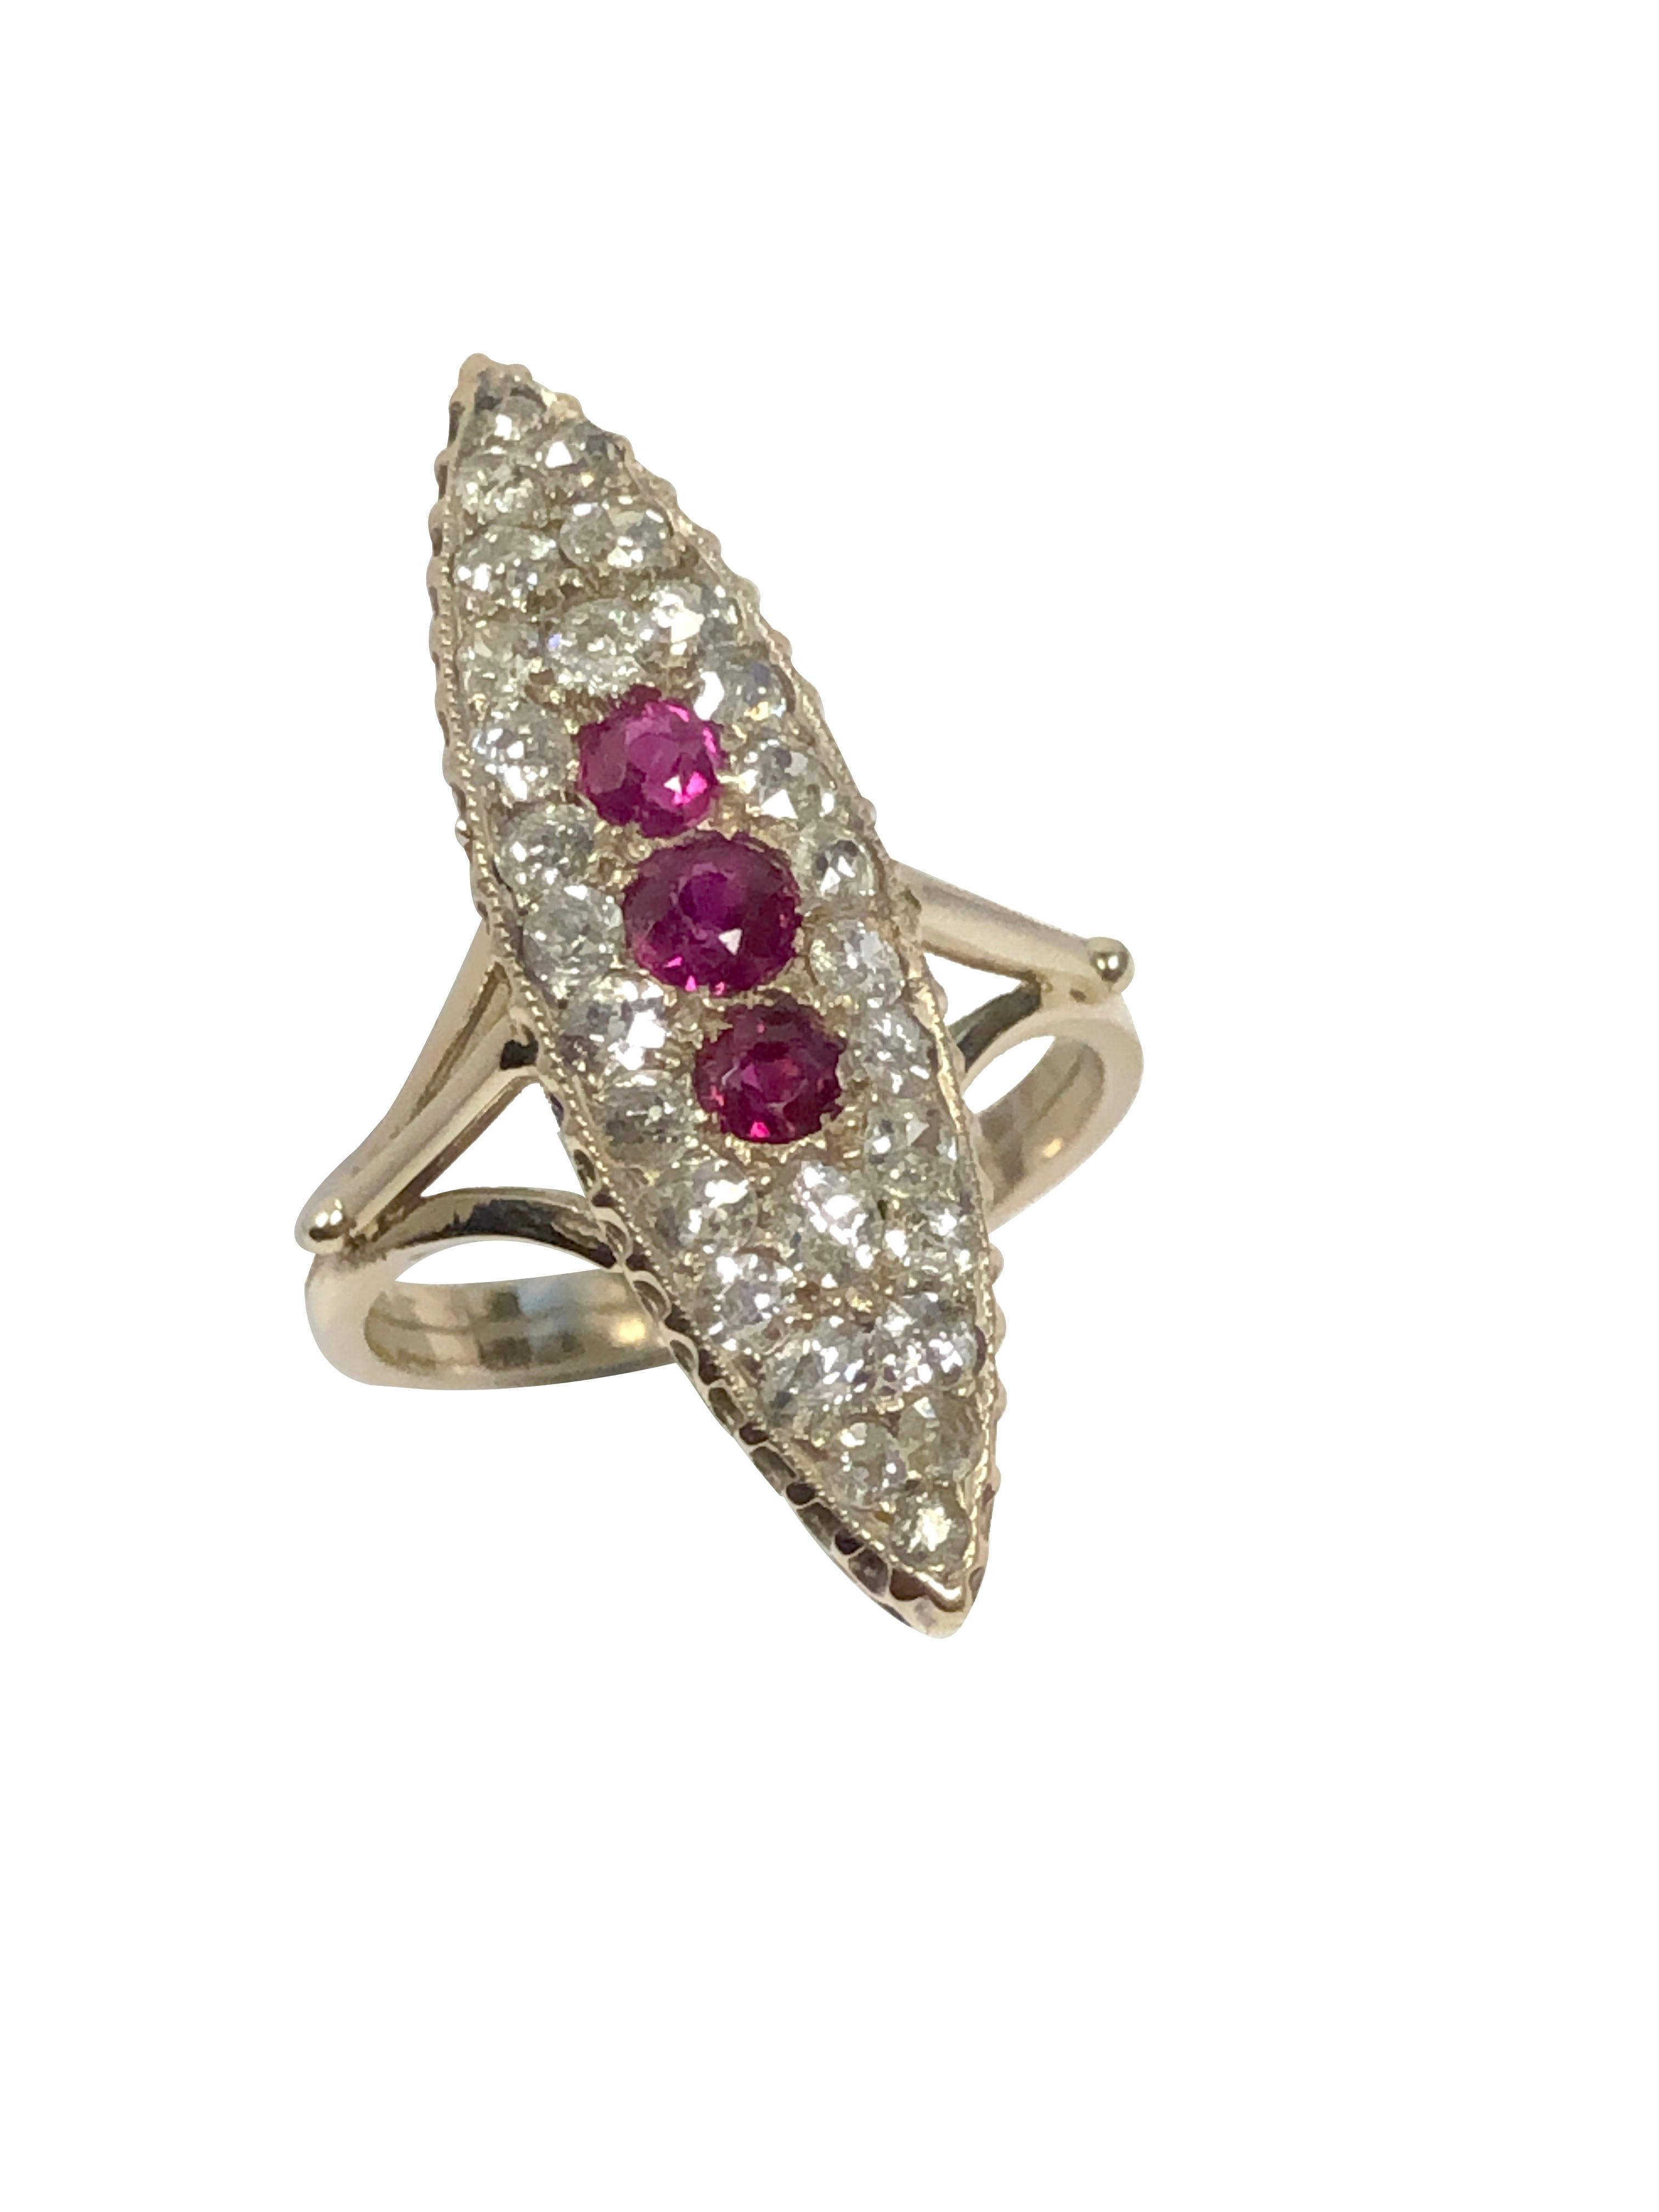 Circa 1900 14k Yellow Gold Navette Ring, measuring 1 1/4 inches in length and 3/8 inch wide, set with Nice Clean White Old Mine cut Diamonds totaling approximately 1.75 Carats and Very Fine Color Rubies. Finger size 7 1/2. Excellent, seldom worn